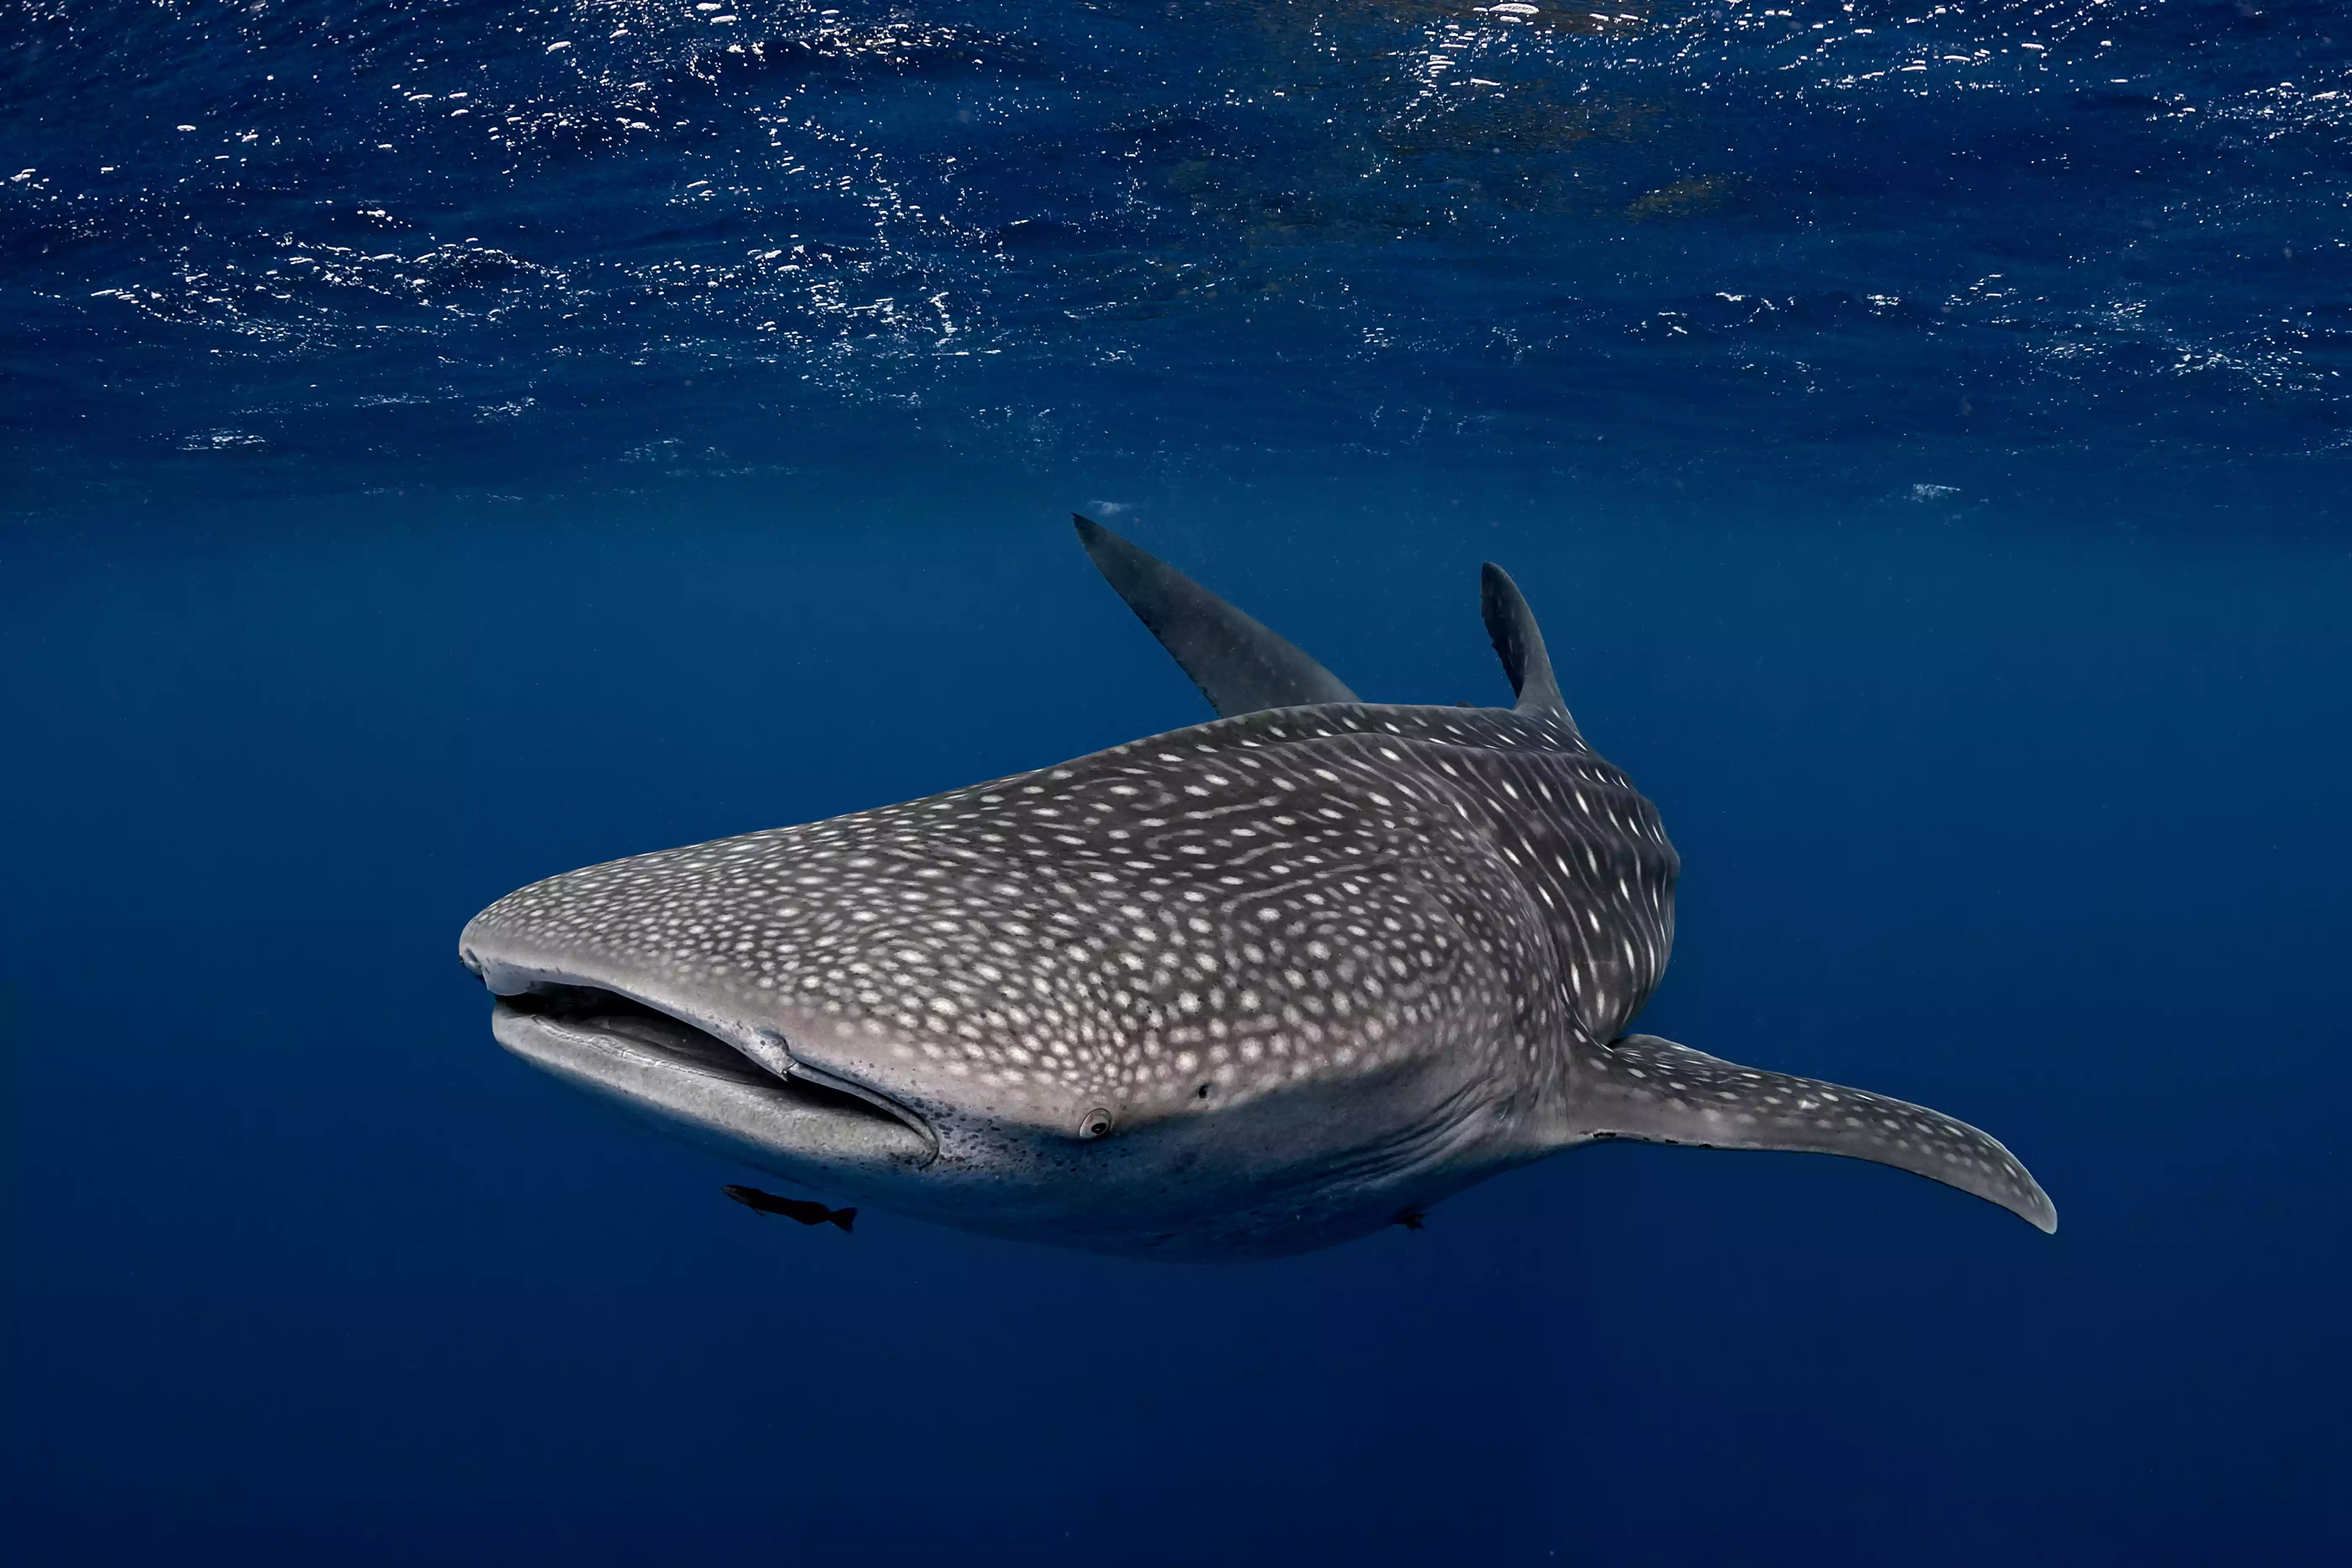 Gray spotted whale shark swimming in the ocean